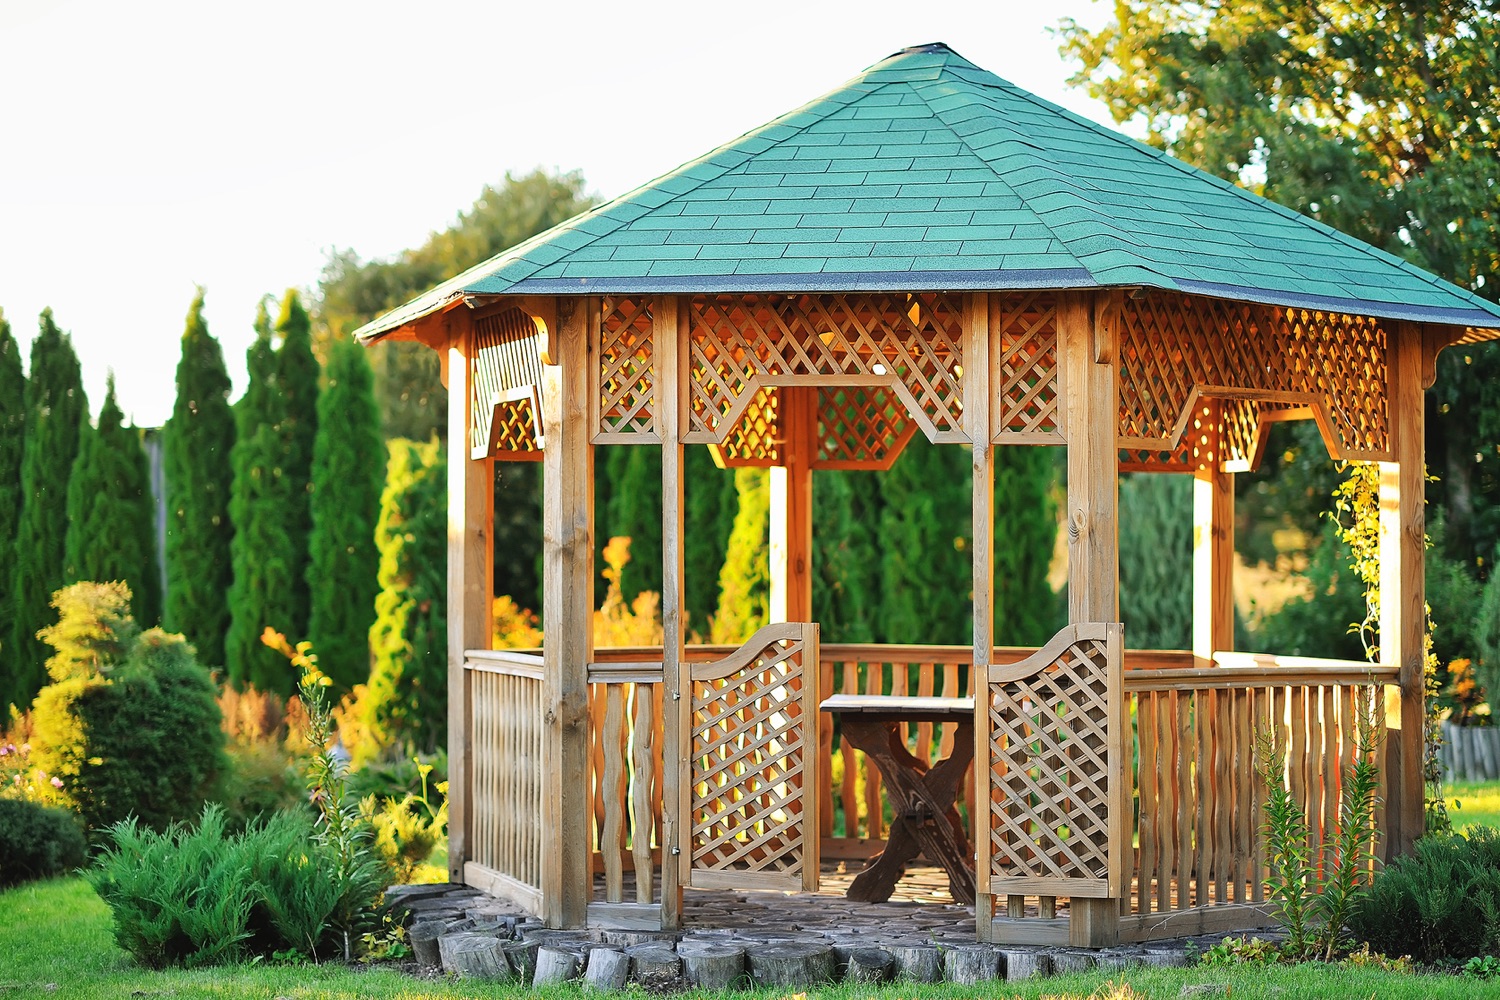 A picture of a beautiful gazebo with bench in a scenic sunny area.